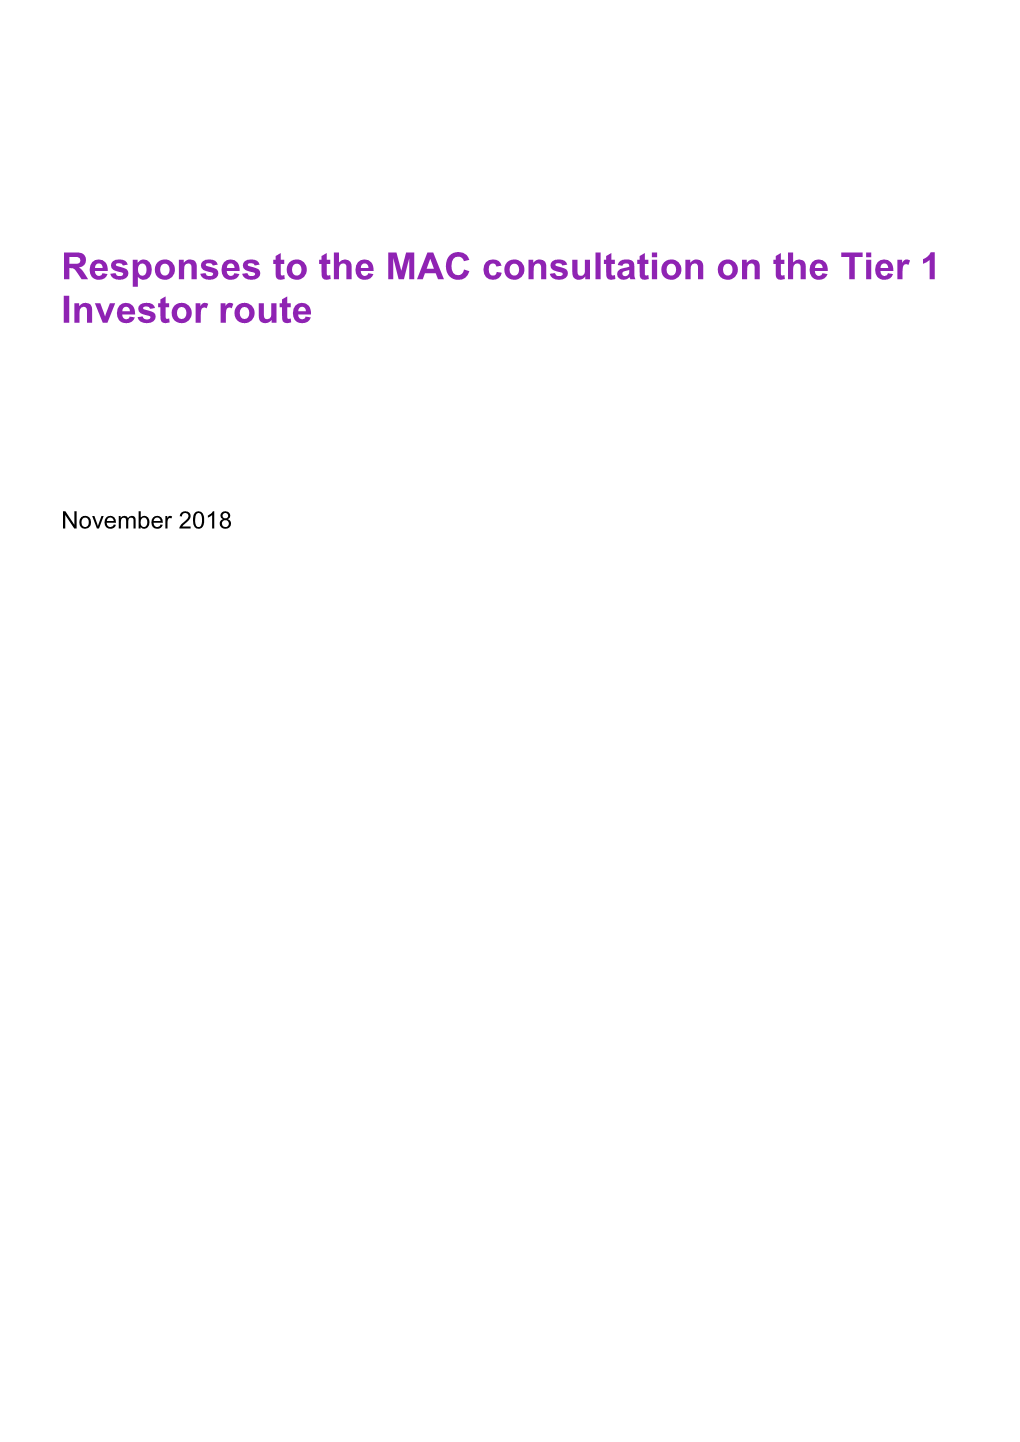 Responses to the MAC Consultation on the Tier 1 Investor Route